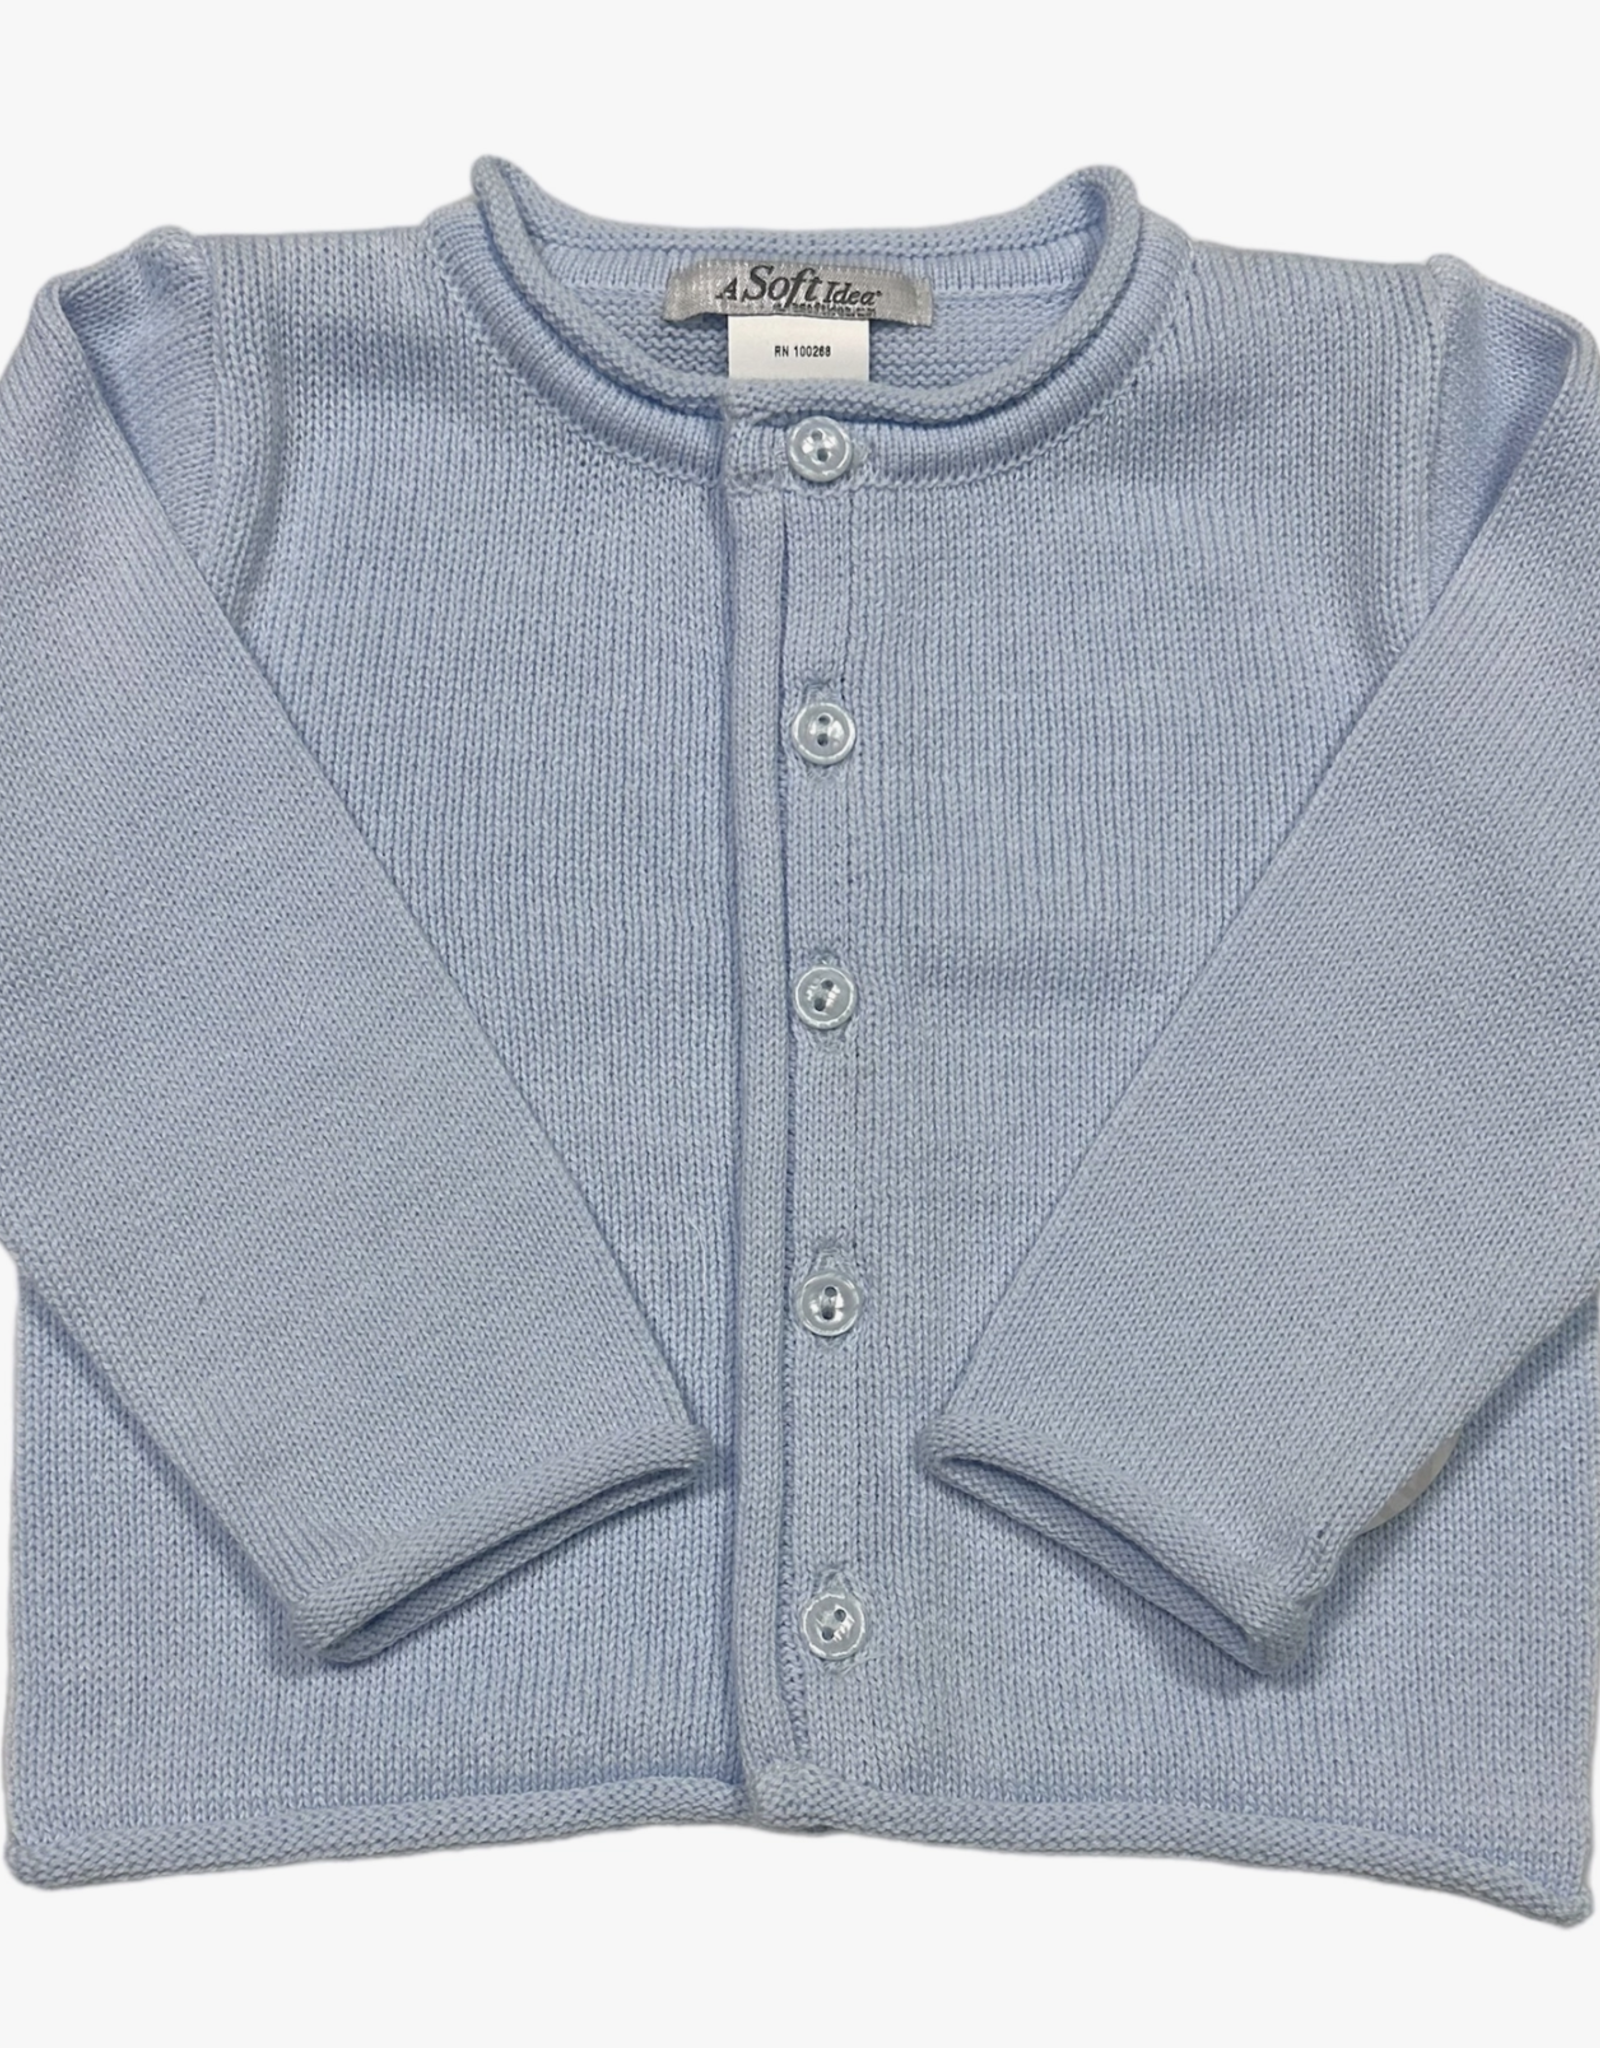 A Soft Idea Rolled Edge Button Front Cardigan- Blue